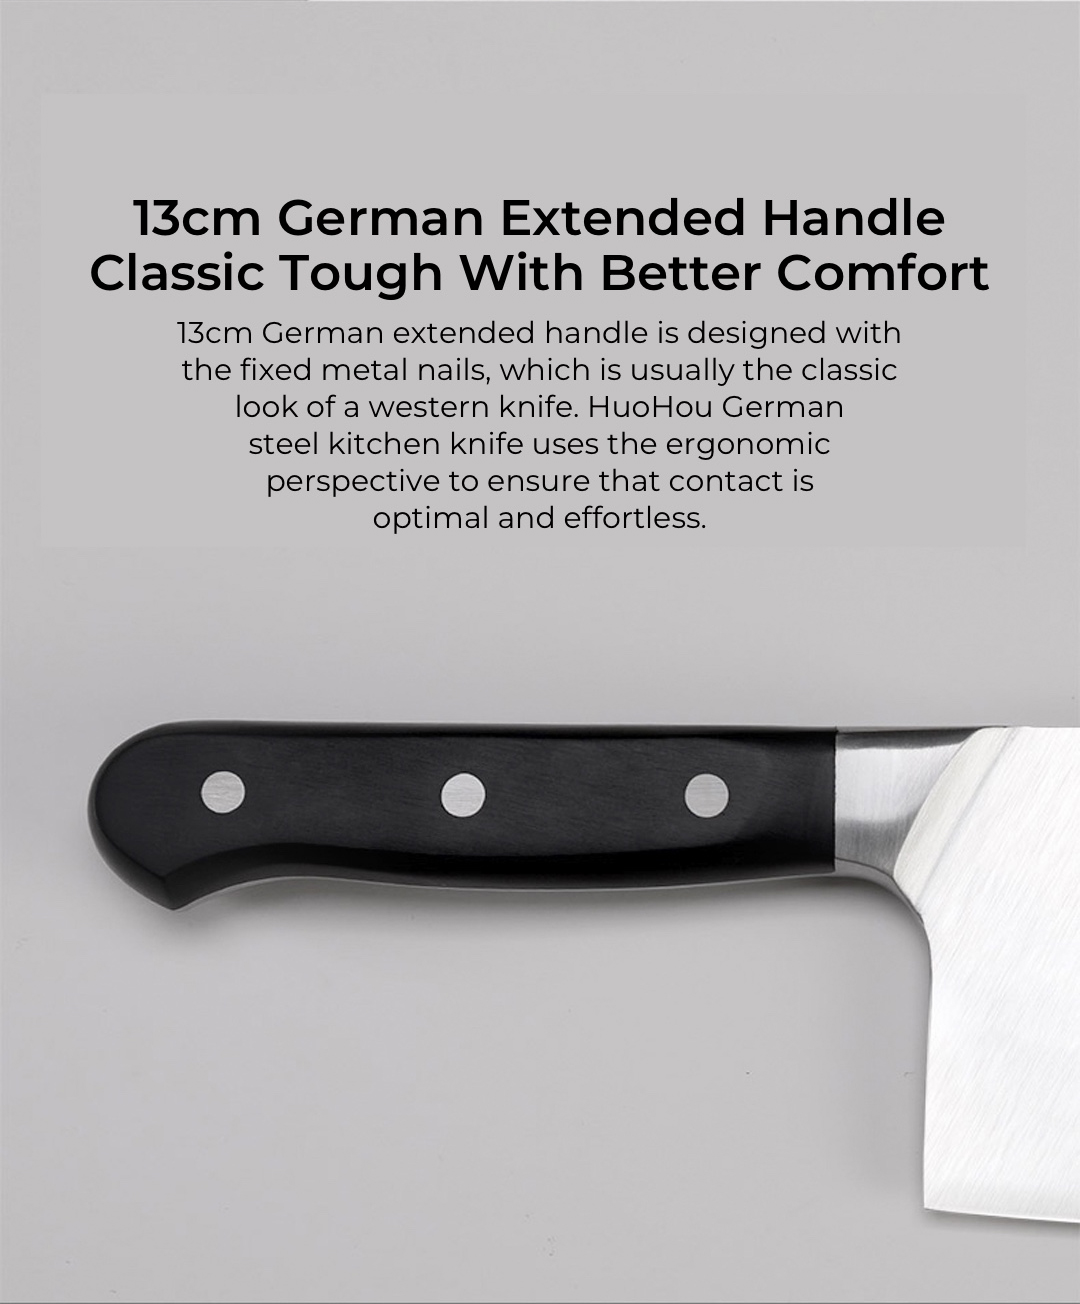 13cm German extended handle is designed with the fixed metal nails, which is usually the classic look of a western knife. HuoHou German steel kitchen knife uses the ergonomic perspective to ensure that contact is optimal and effortless.